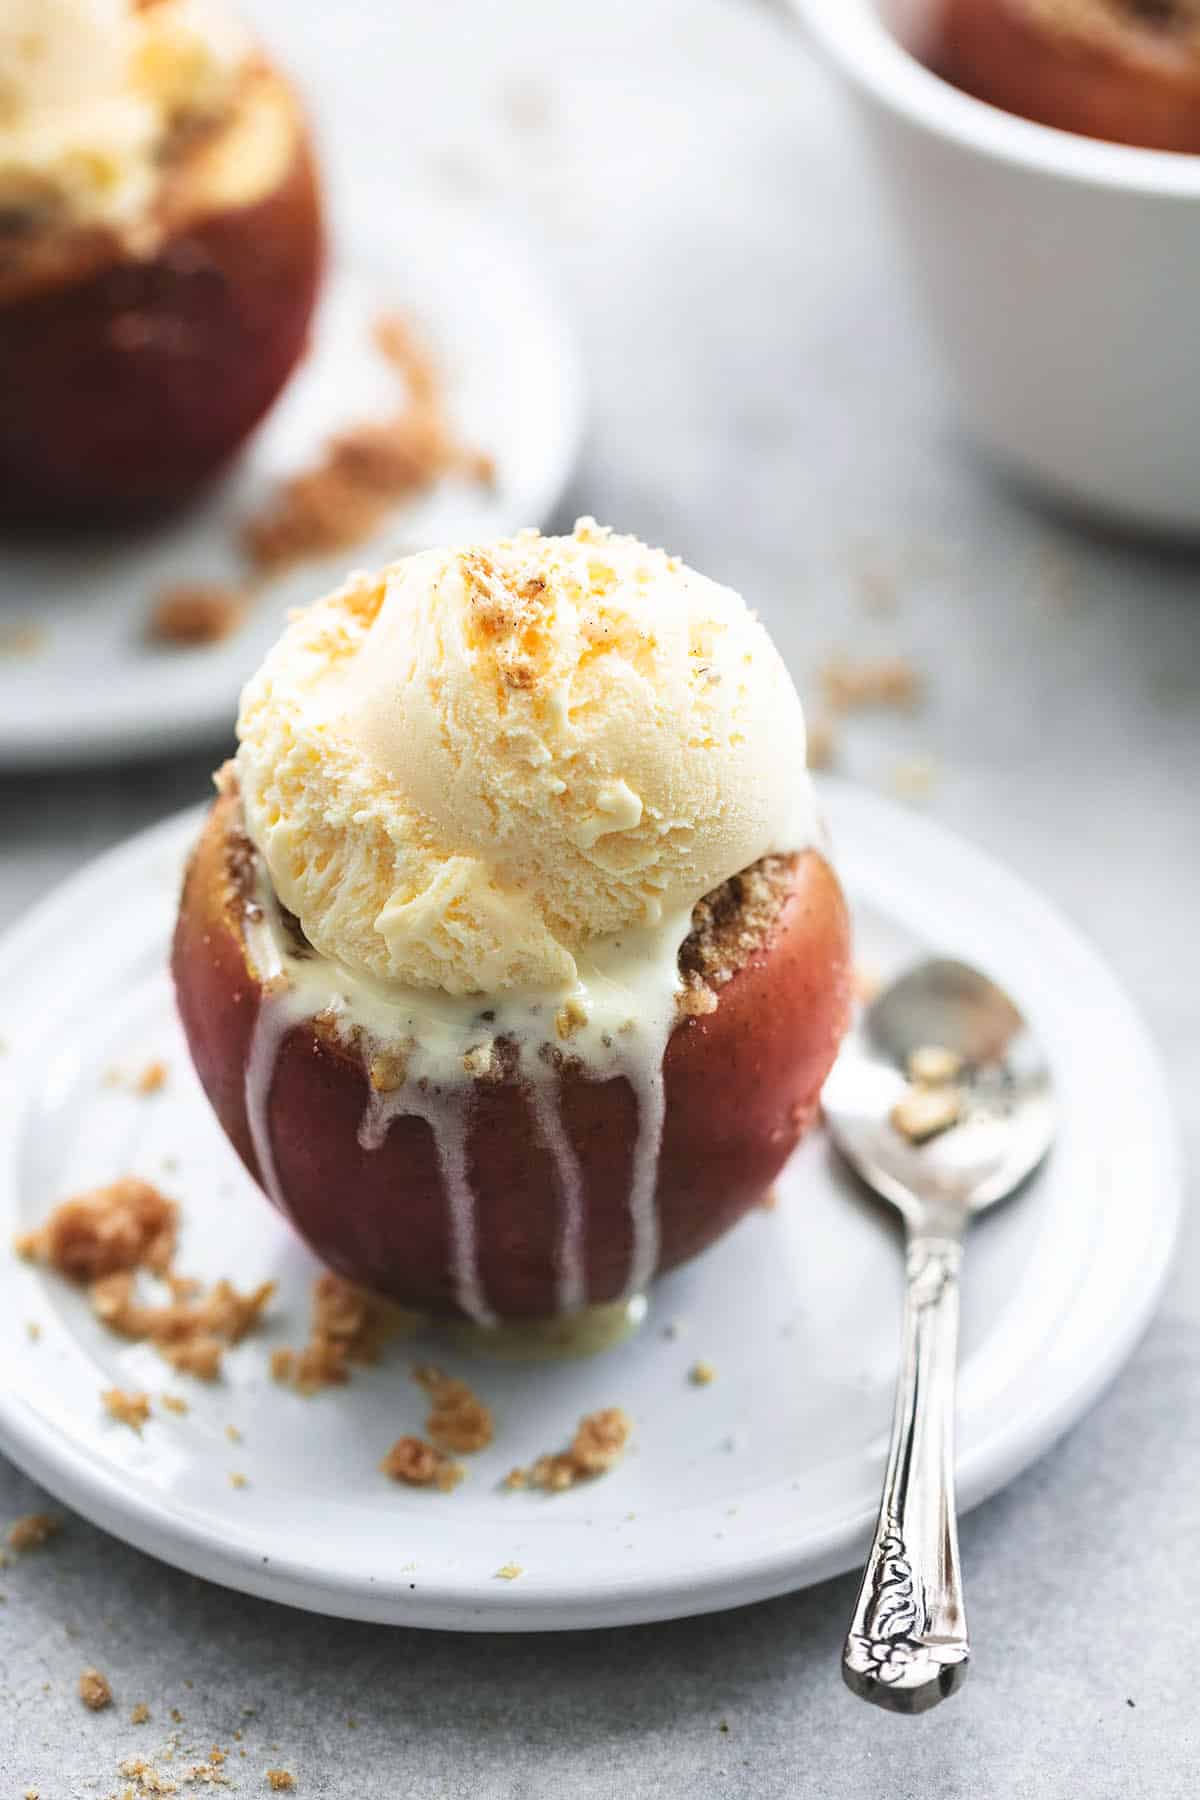 ice cream on top of apple on plate with spoon